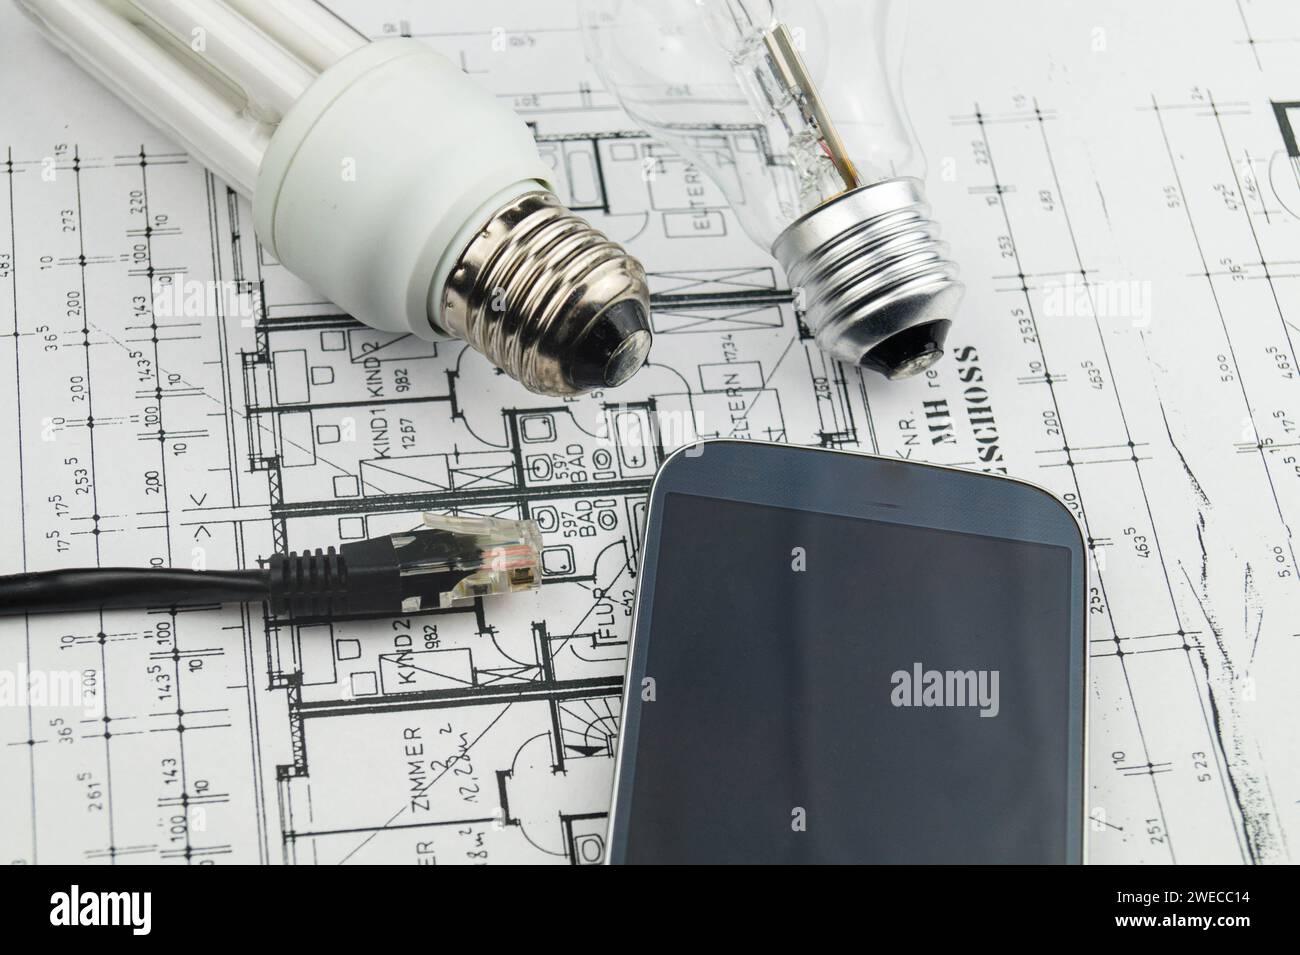 Network plug, lamps and smartphone on construction drawing, symbolic image for Smart Home Stock Photo